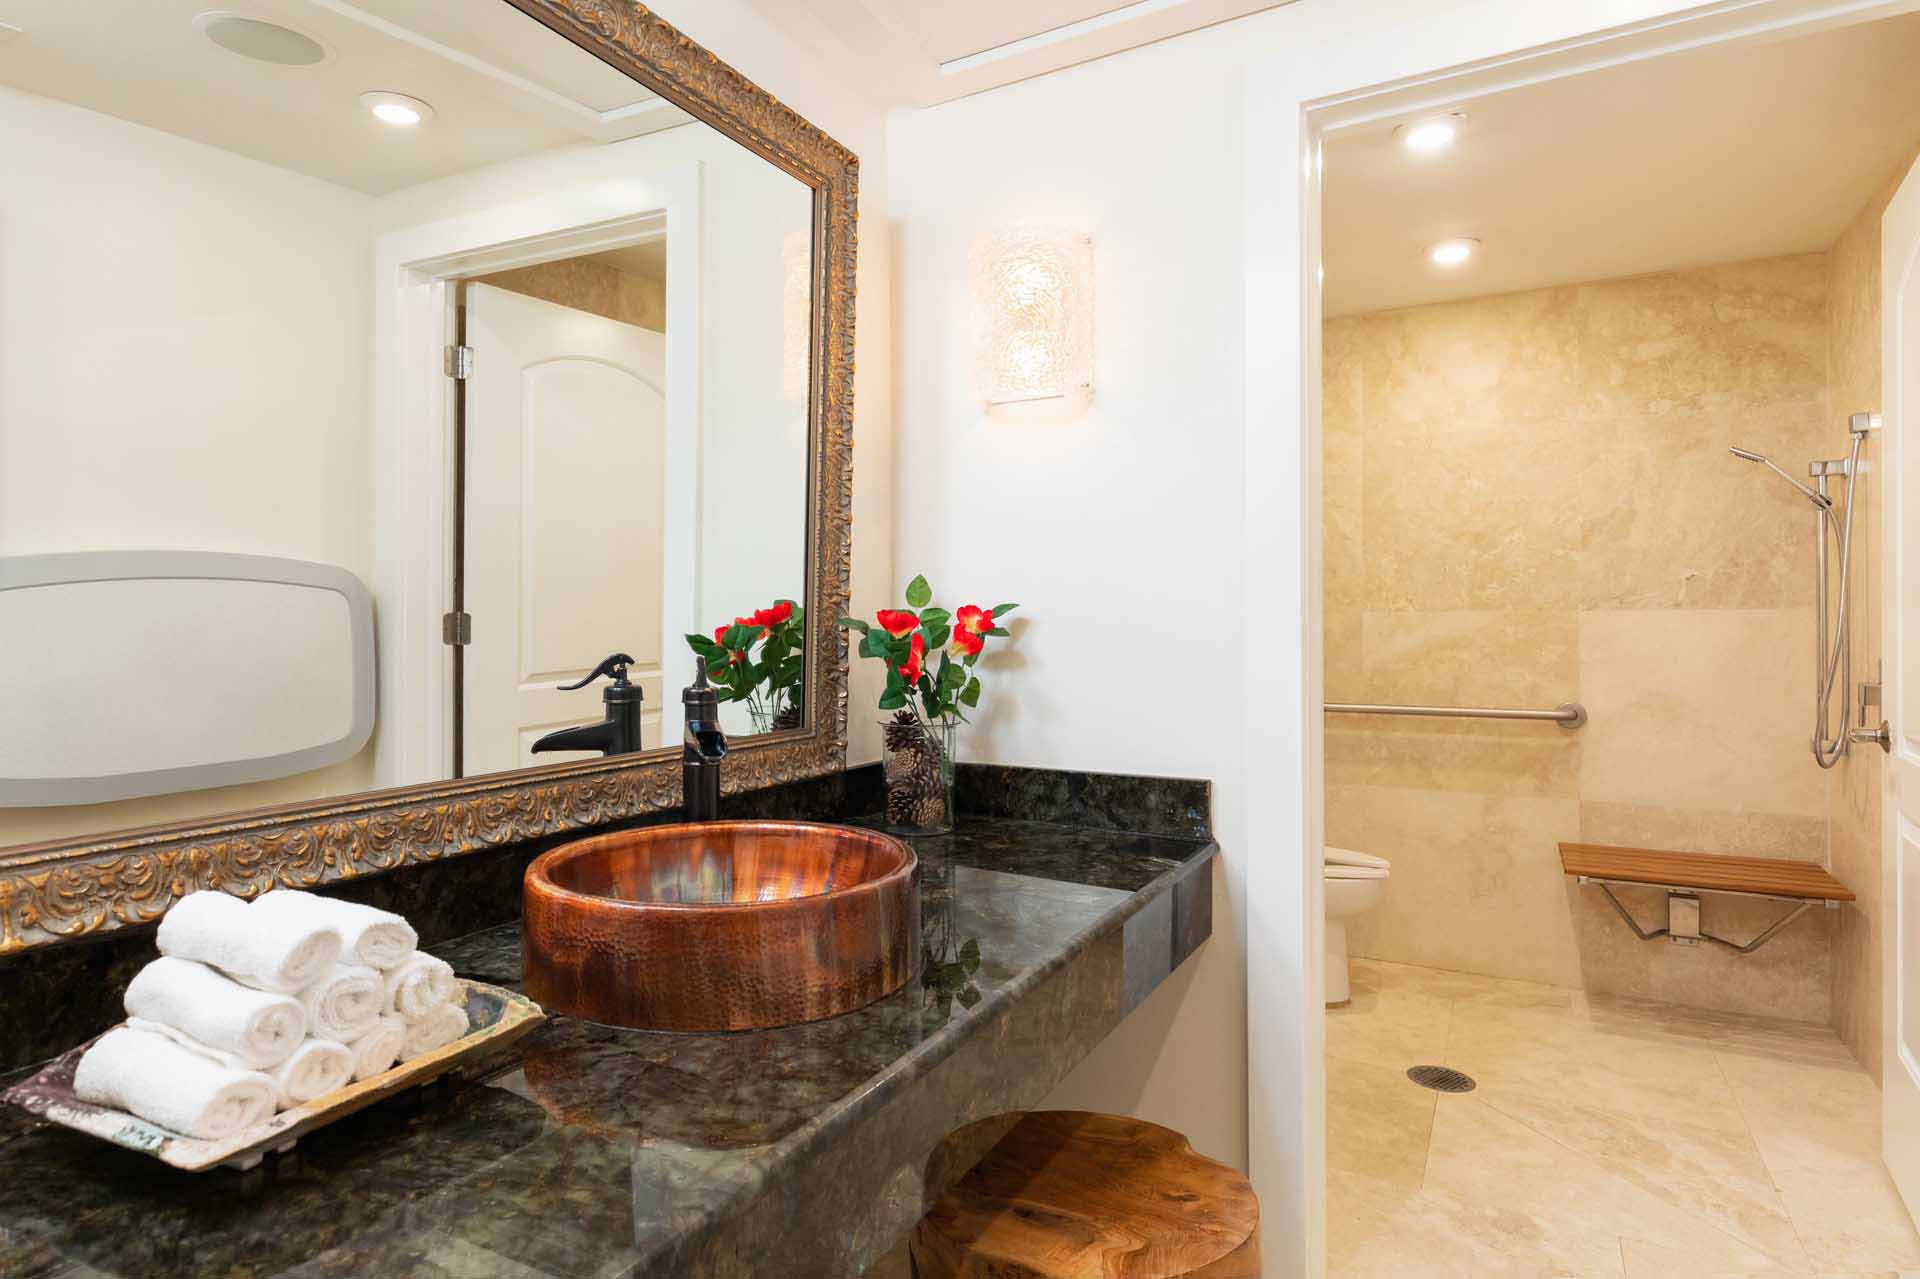 Grand Lodge bathroom with large vanity and accessible shower and water closet with bench